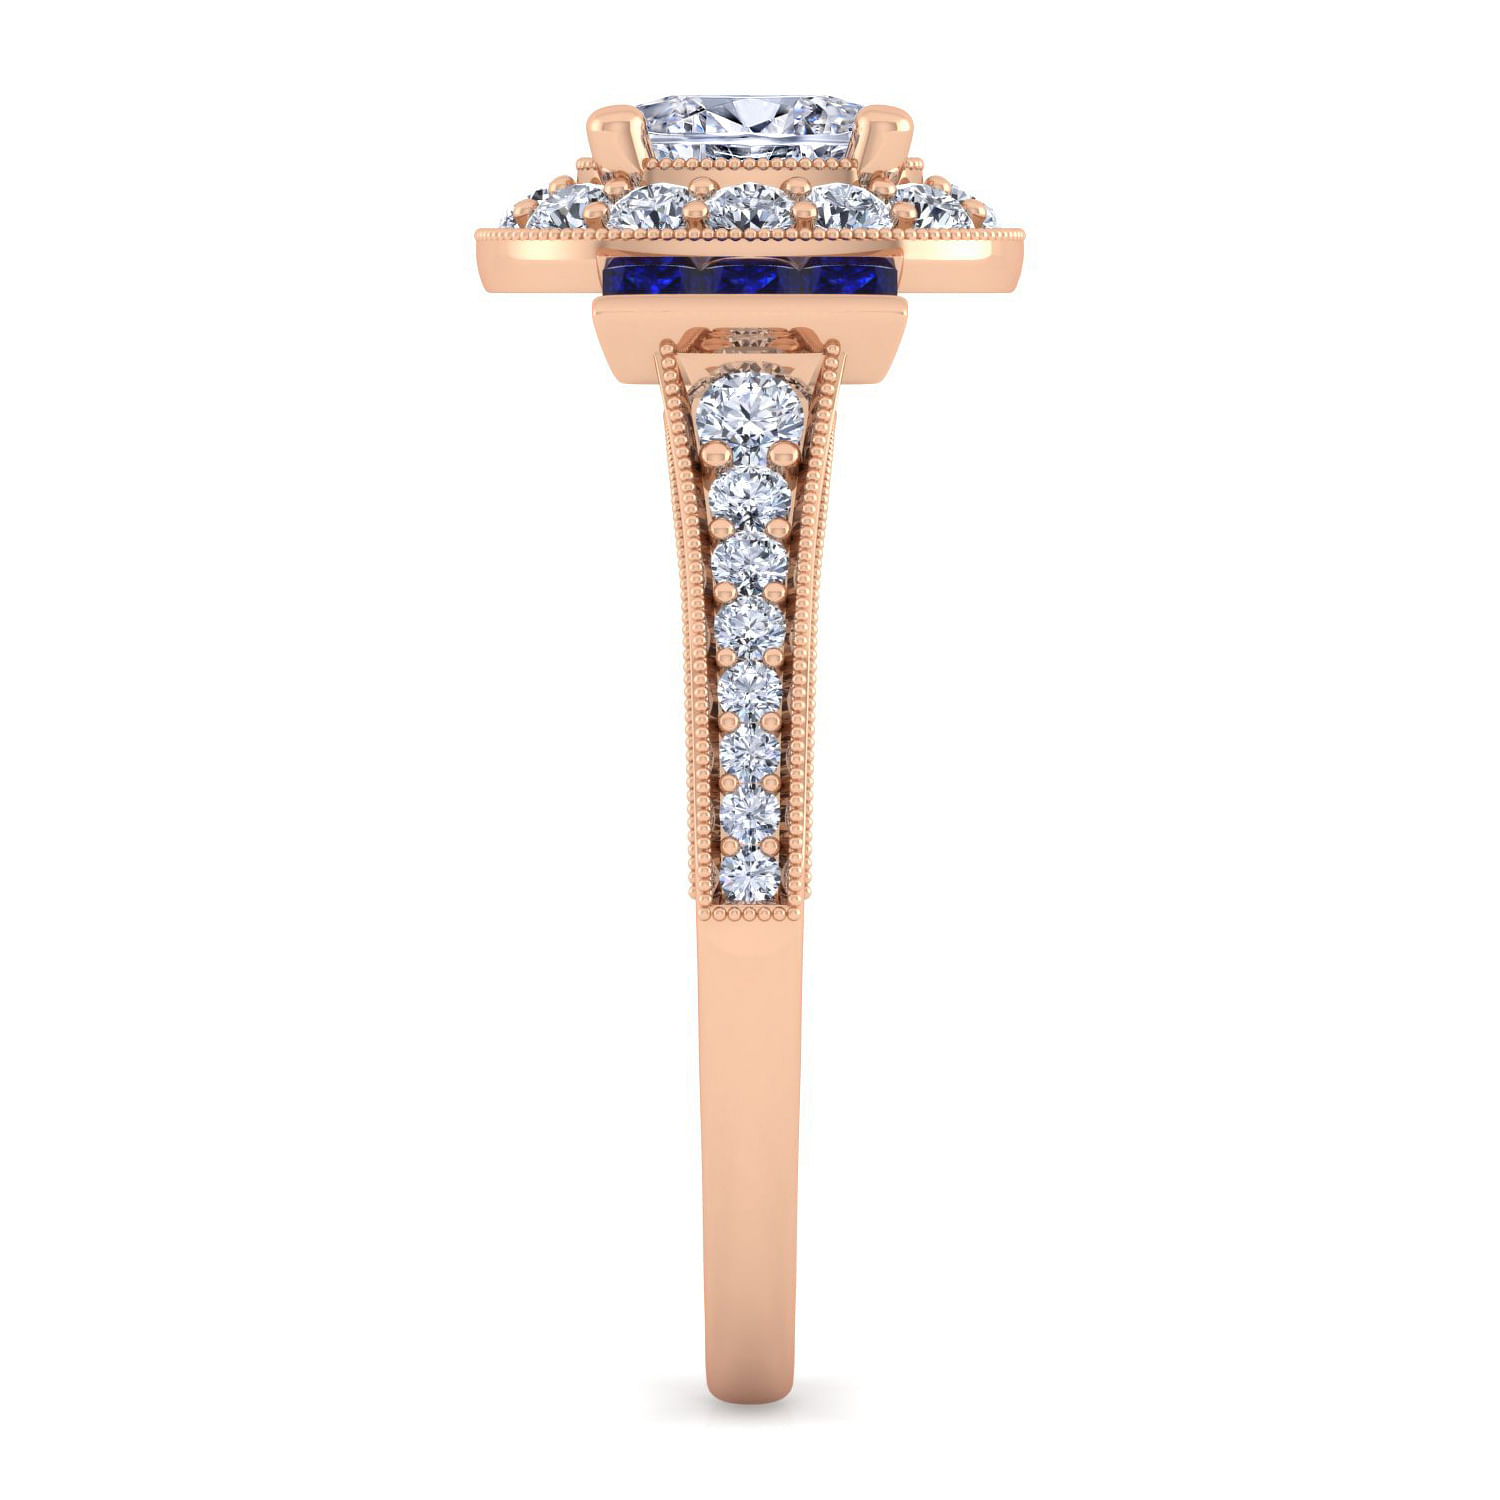 Vintage Inspired 14K Rose Gold Oval Halo Diamond and Sapphire Engagement Ring